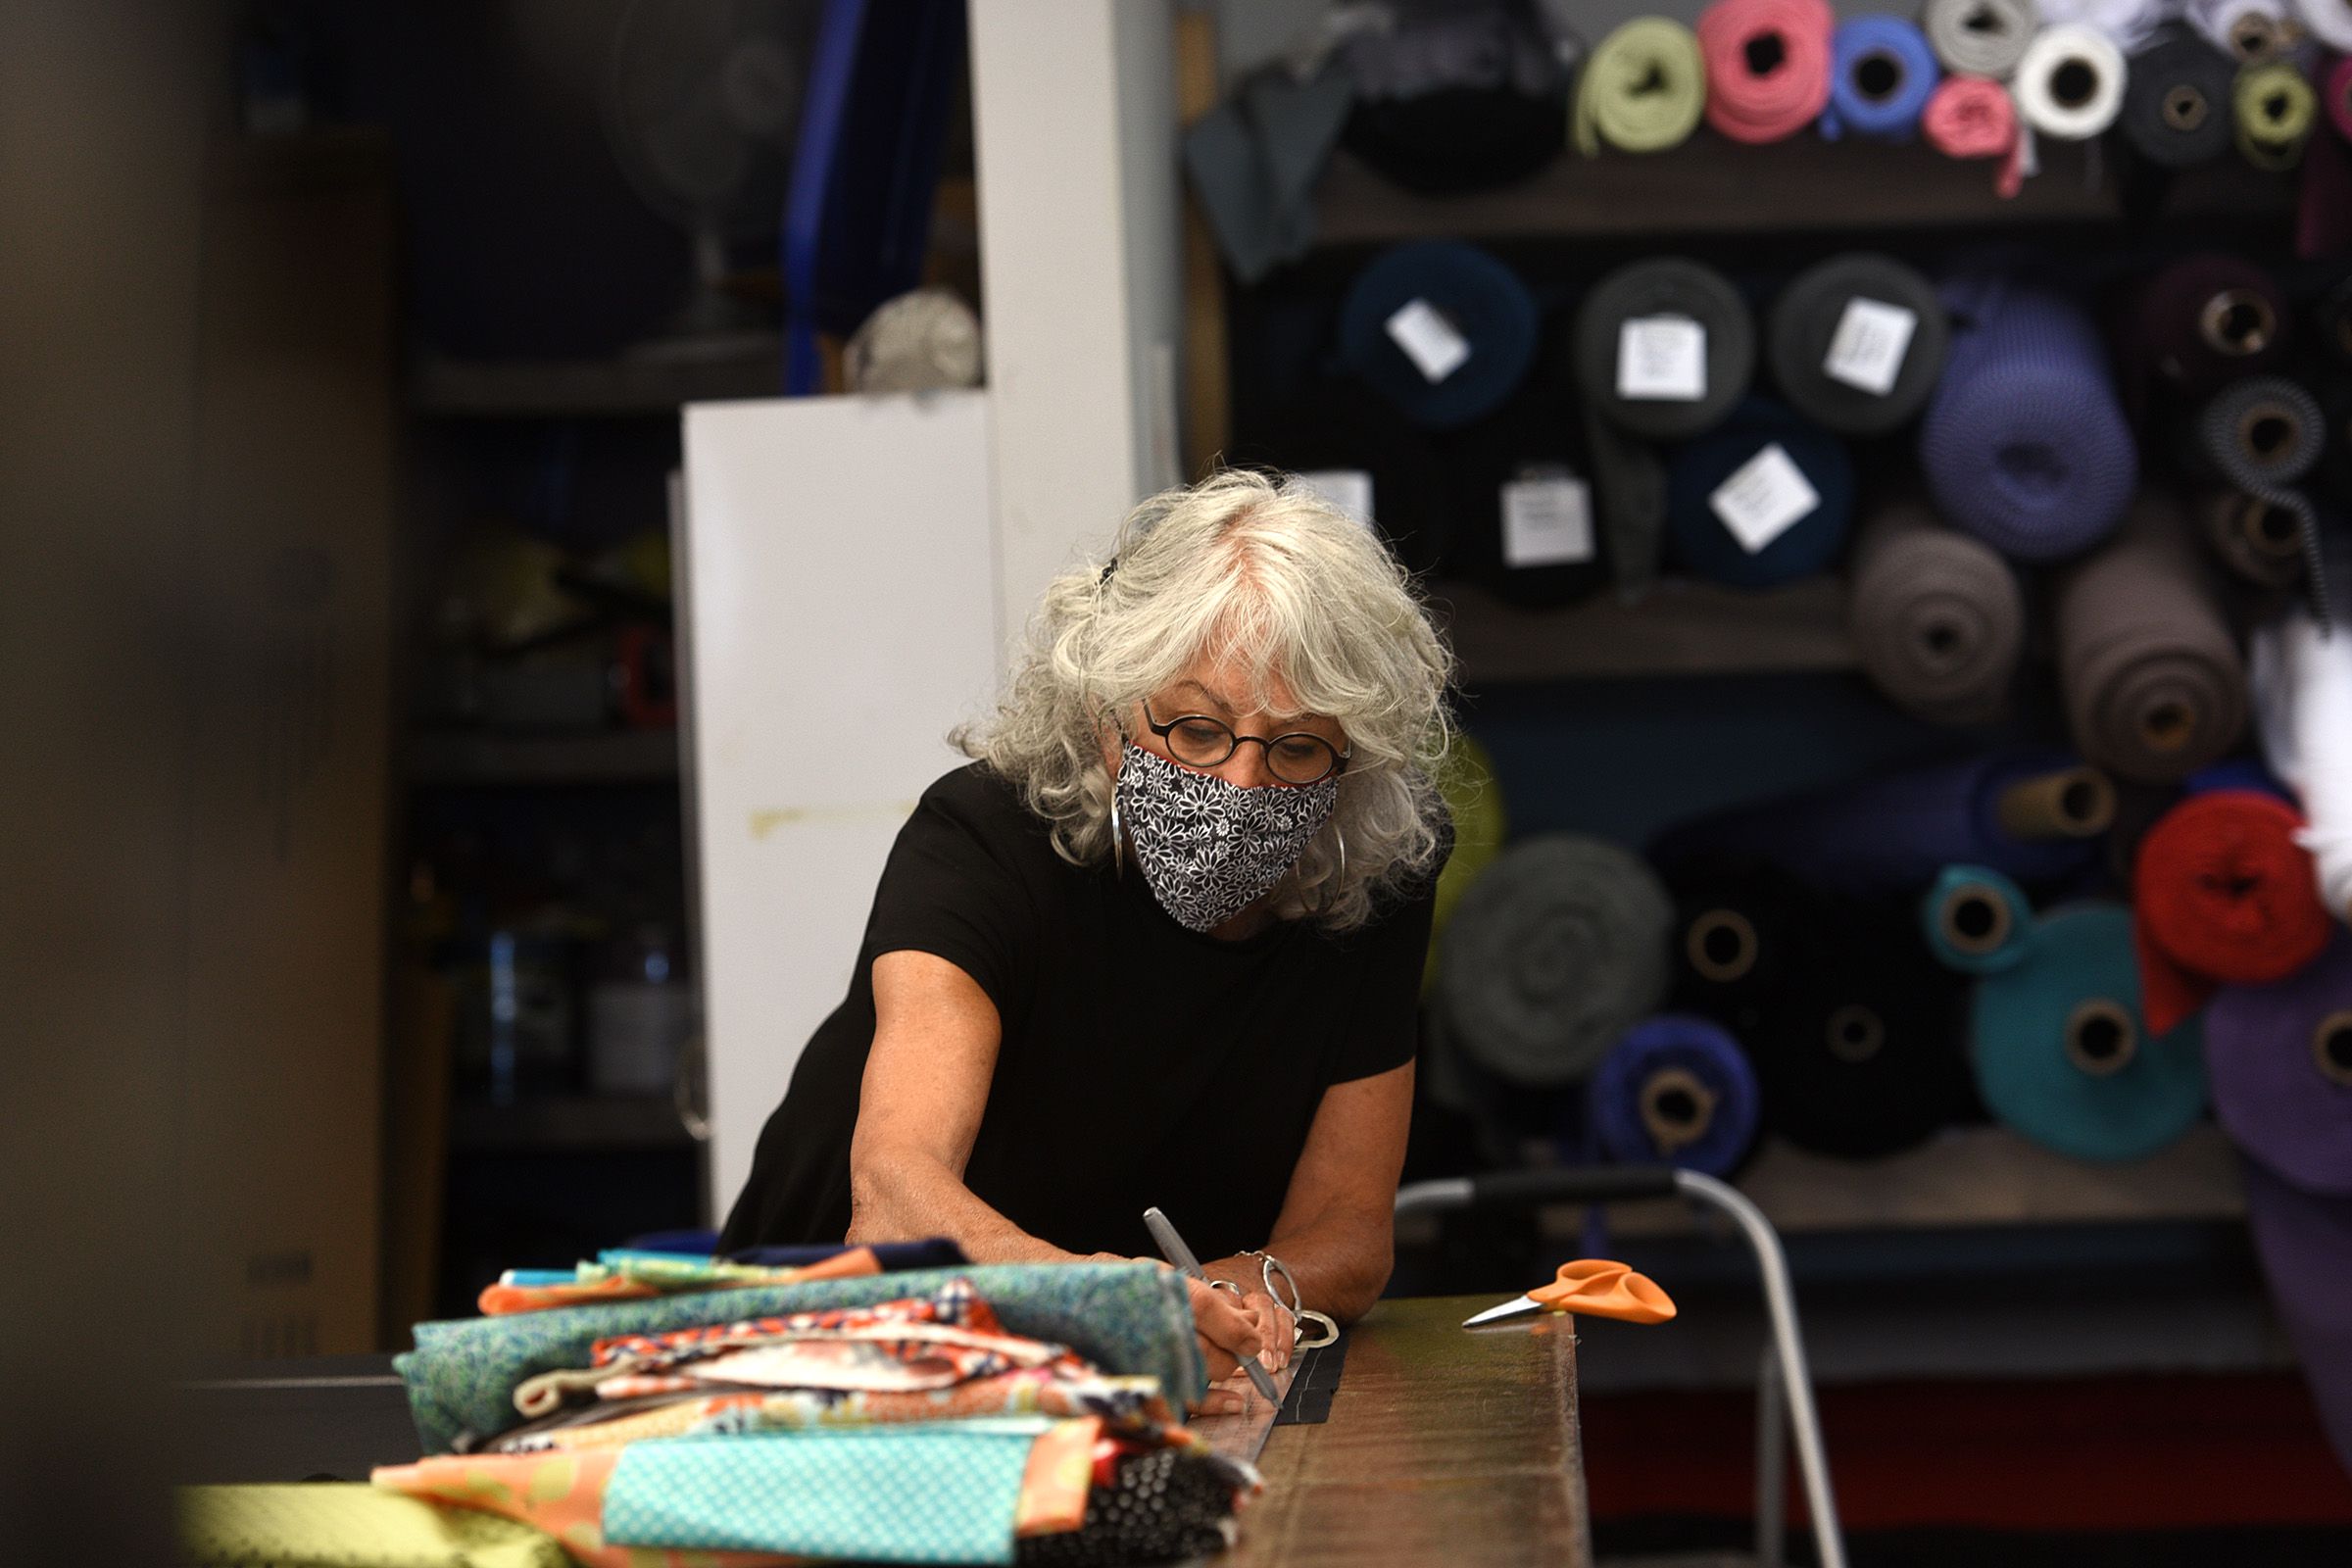 Joan Ecker, co-owner of Fat Hat Clothing Co., cuts material for masks on Wednesday, July 1, 2020, in Quechee, Vt. The company has made 5,000 cloth masks during the COVID-19 pandemic. (Valley News - Jennifer Hauck) Copyright Valley News. May not be reprinted or used online without permission. Send requests to permission@vnews.com.